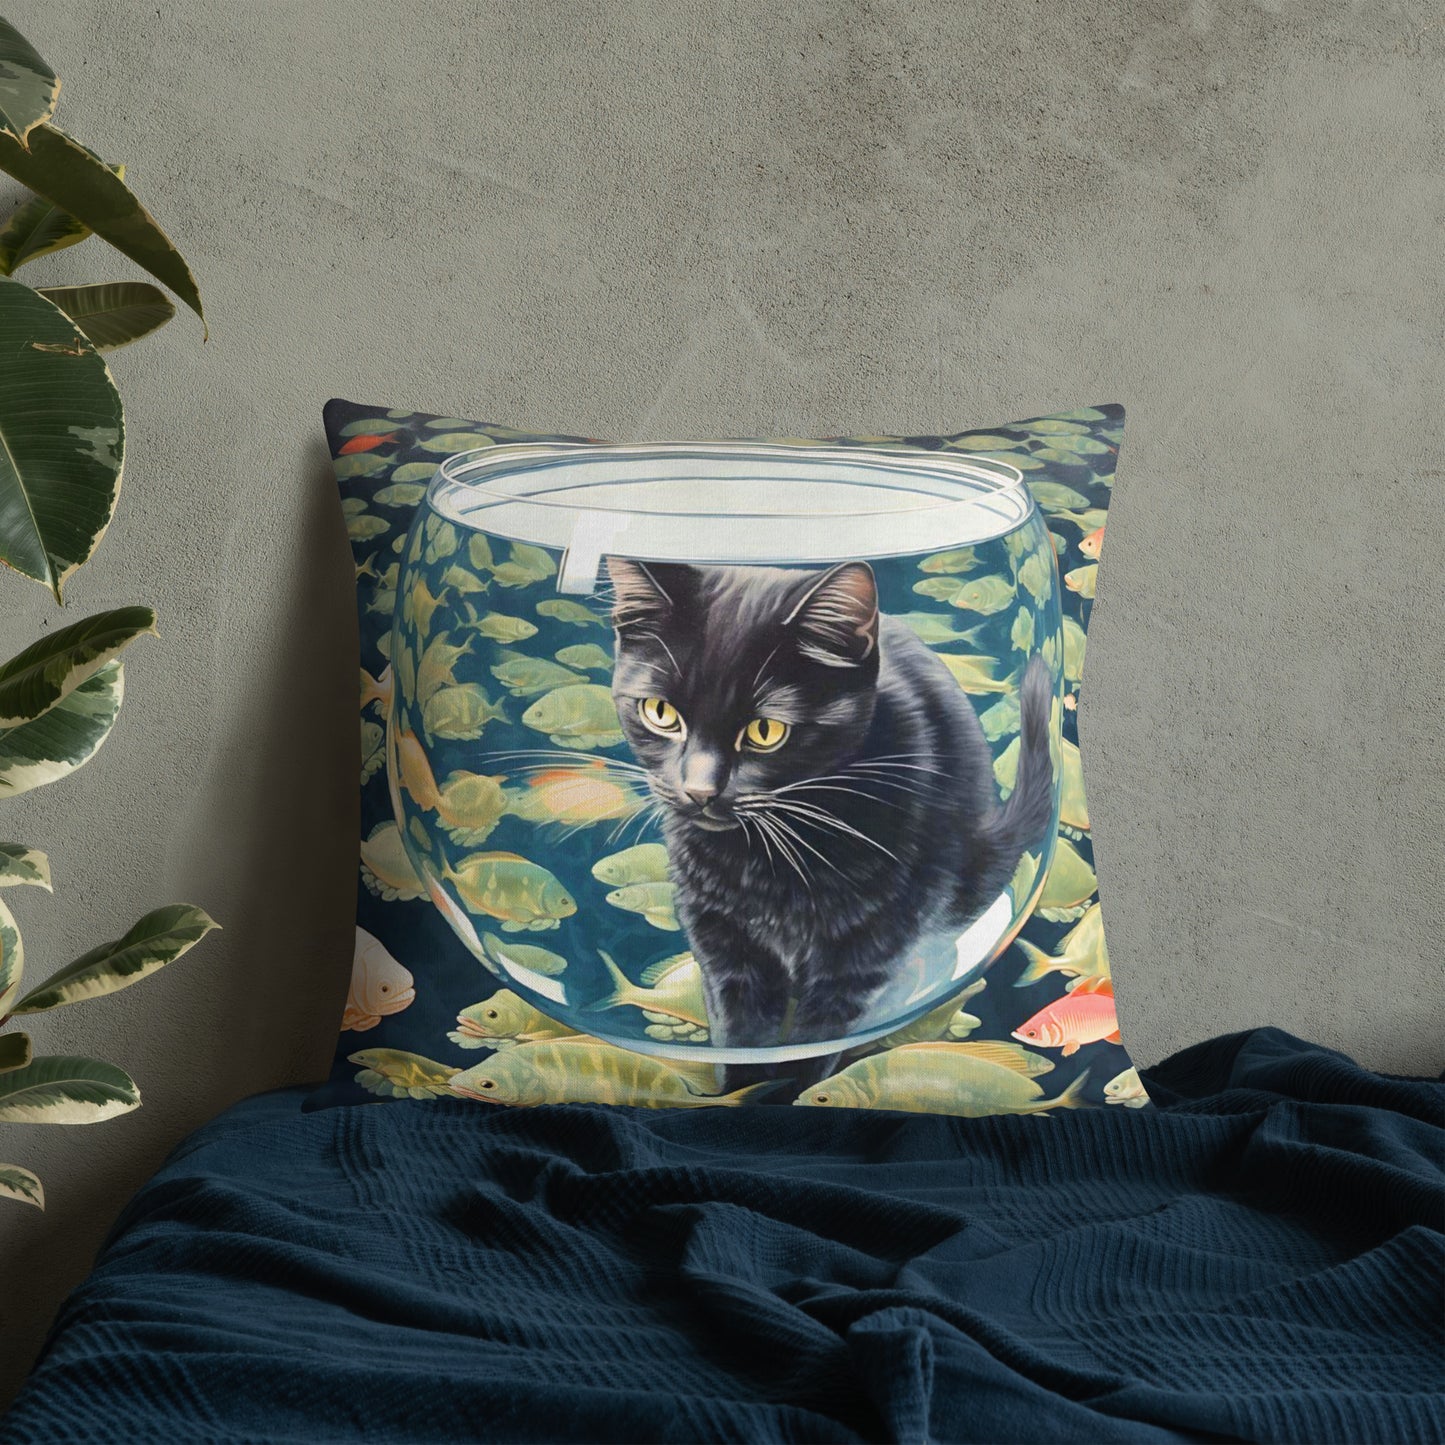 Alice - Black Cat Watching a Fishbowl Pillow